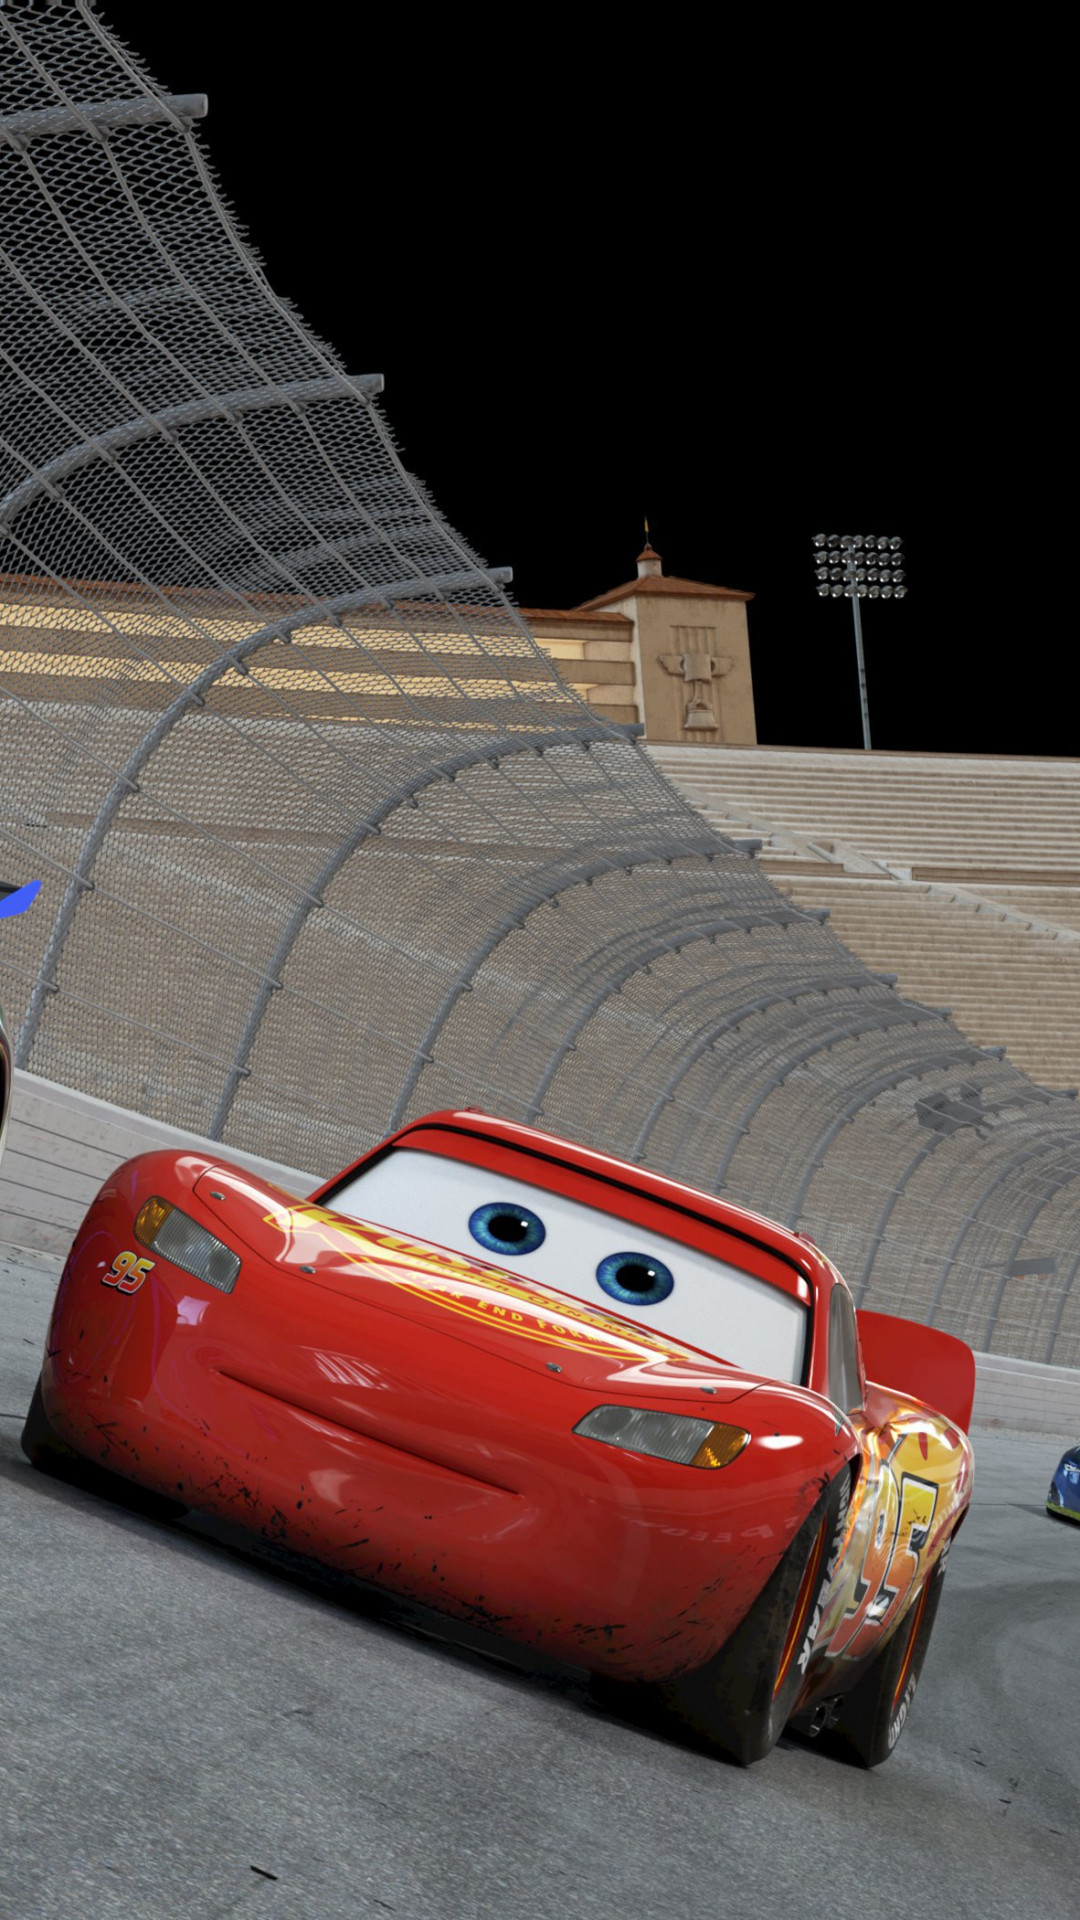 Wallpaper Cars 3, 4k, Lightning McQueen, poster, Movies #14175 - Page 840